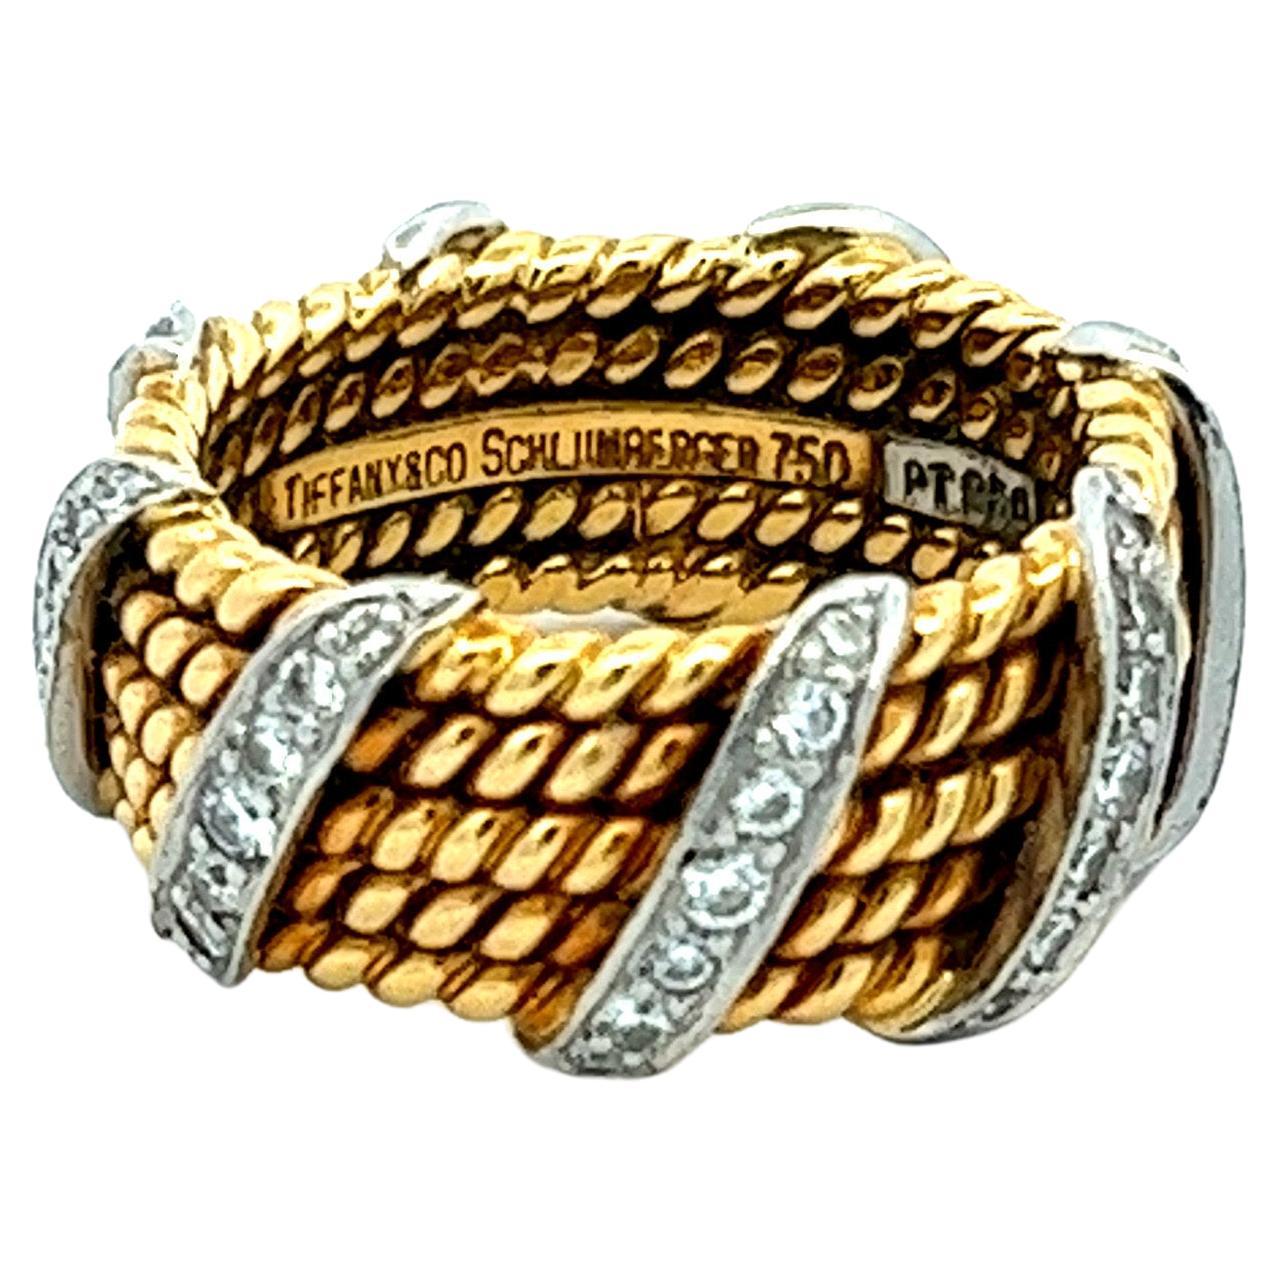 Tiffany & Co. Schlumberger 18k Gold, Platinum 5-Row Rope Band Ring with Diamonds